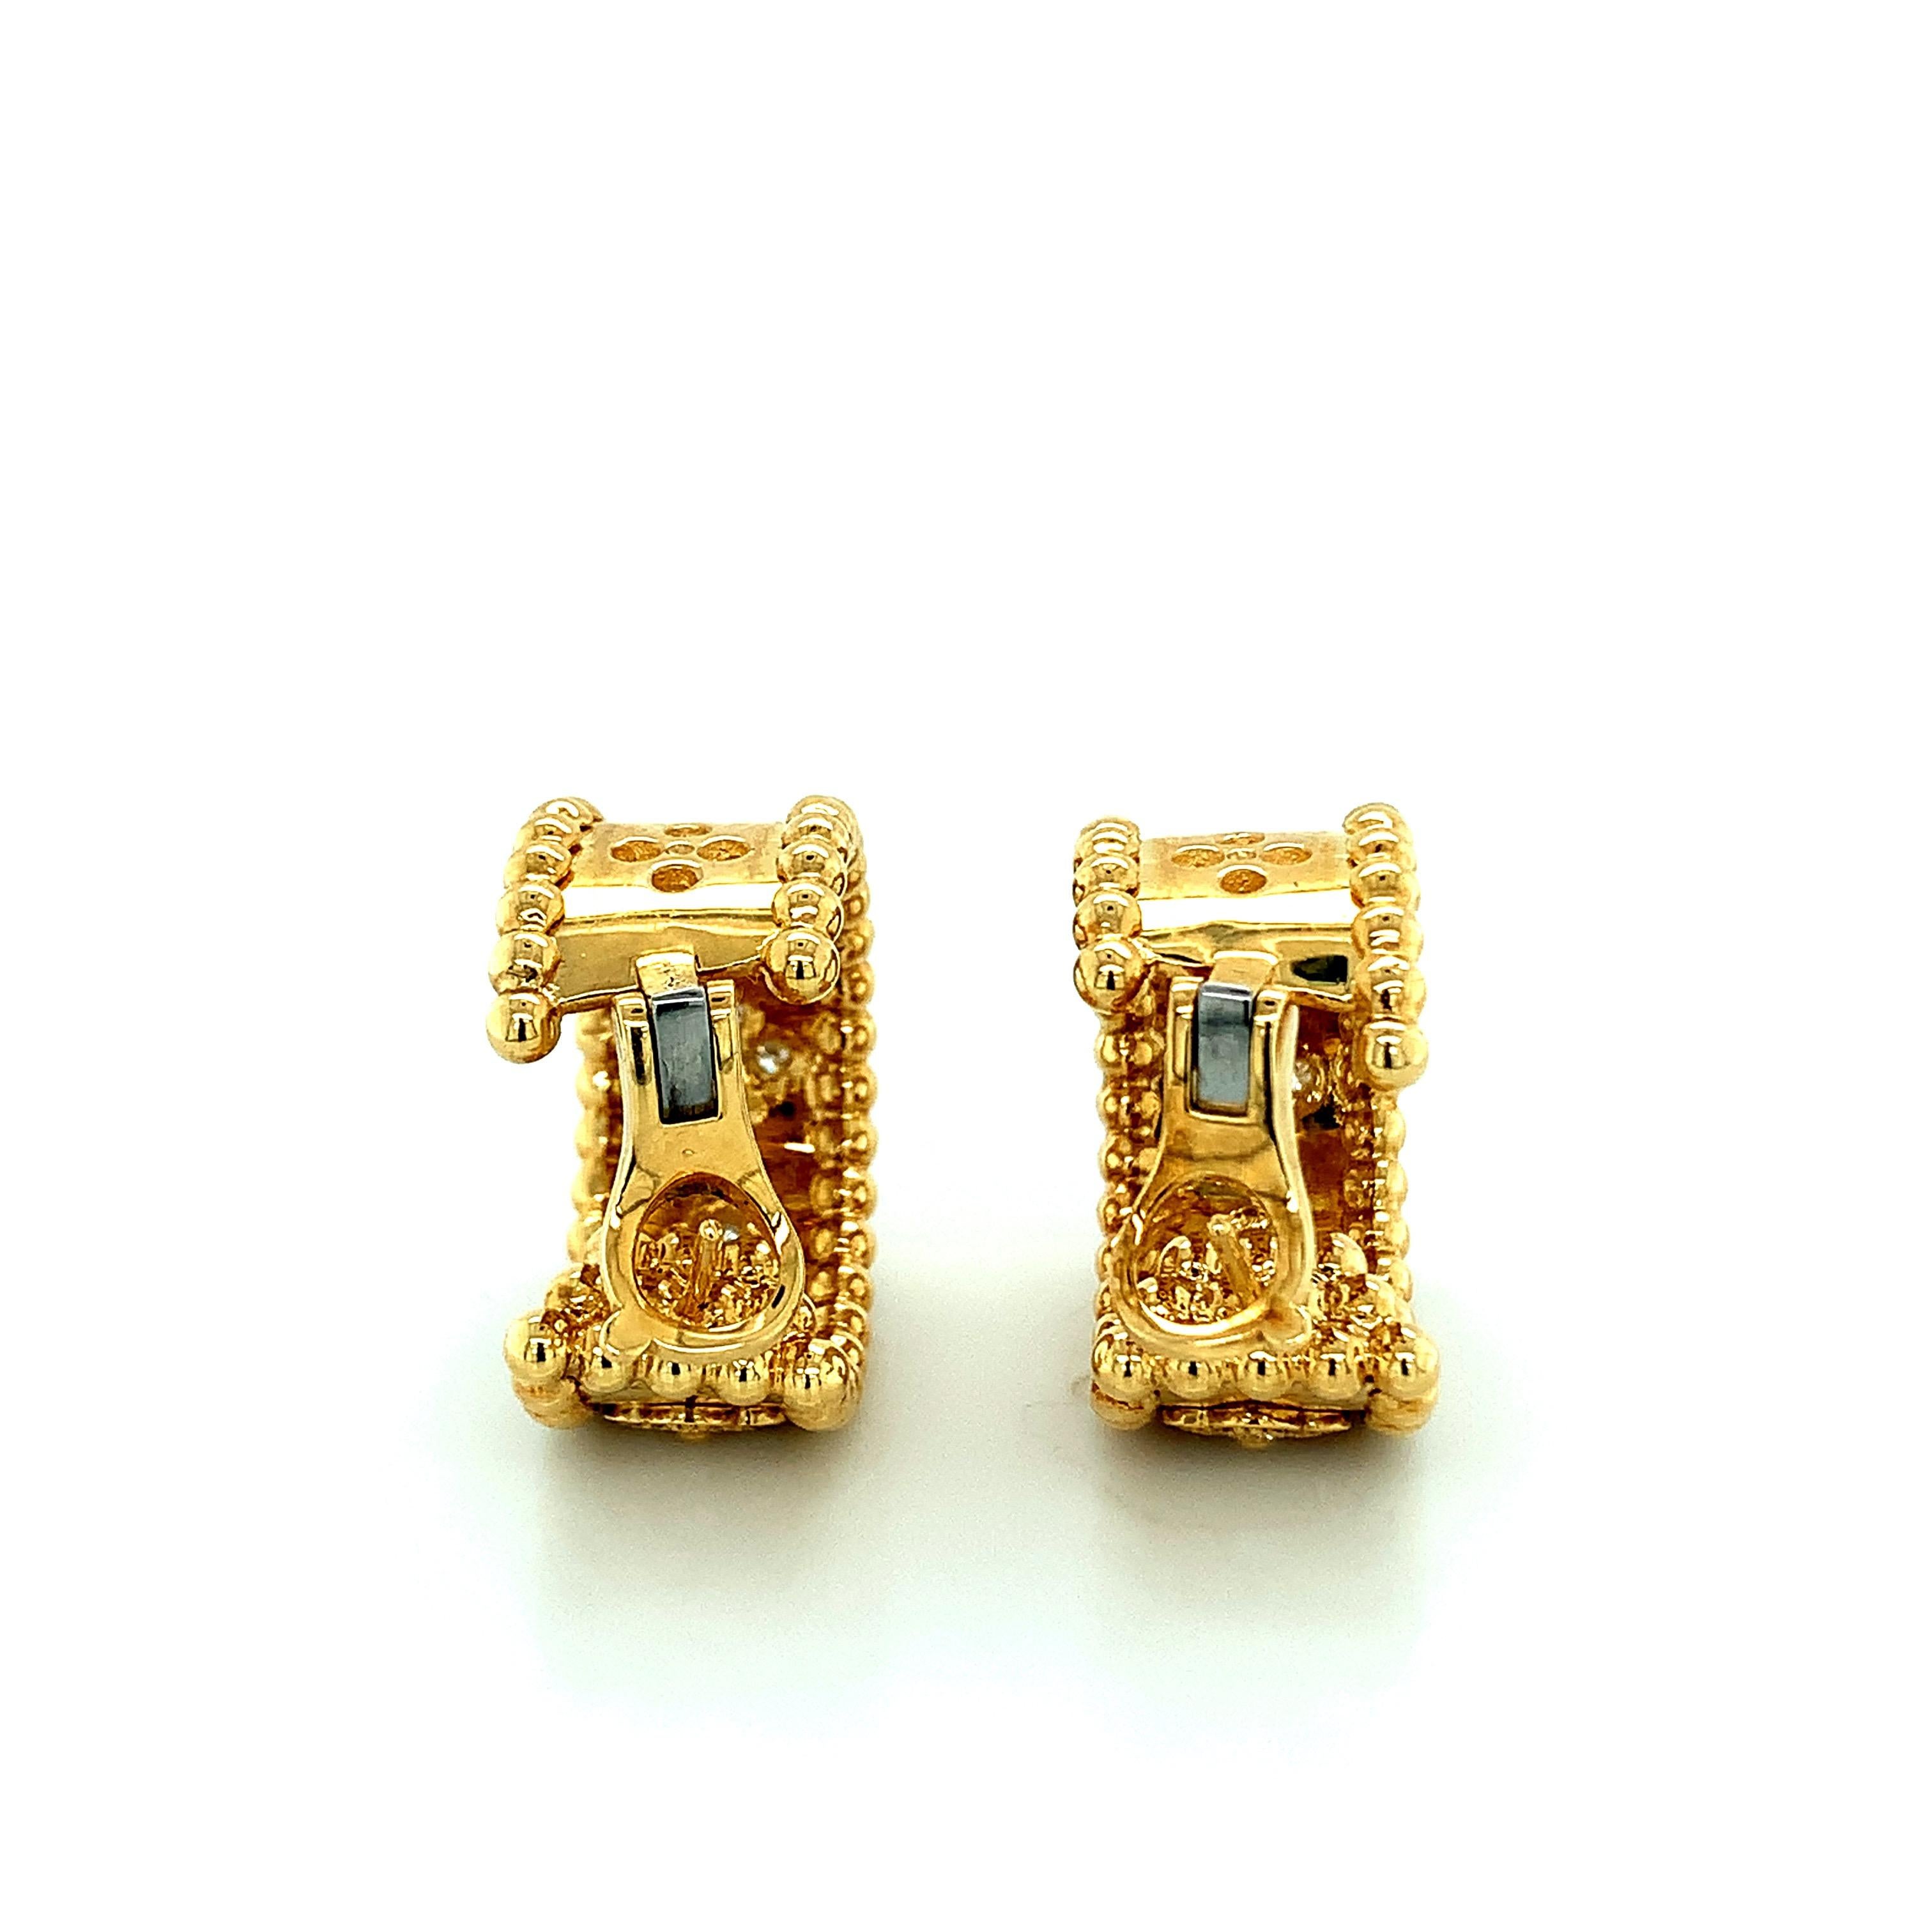 Van Cleef & Arpels 18 karat yellow gold earrings with round-cut diamonds. This pair comes from the luxury brand's iconic Perlée collection. Serial no. JB652399. Marked: VCA / Au750. Total weight: 20.2 grams. Width: 1 cm. Length: 2.1 cm. 